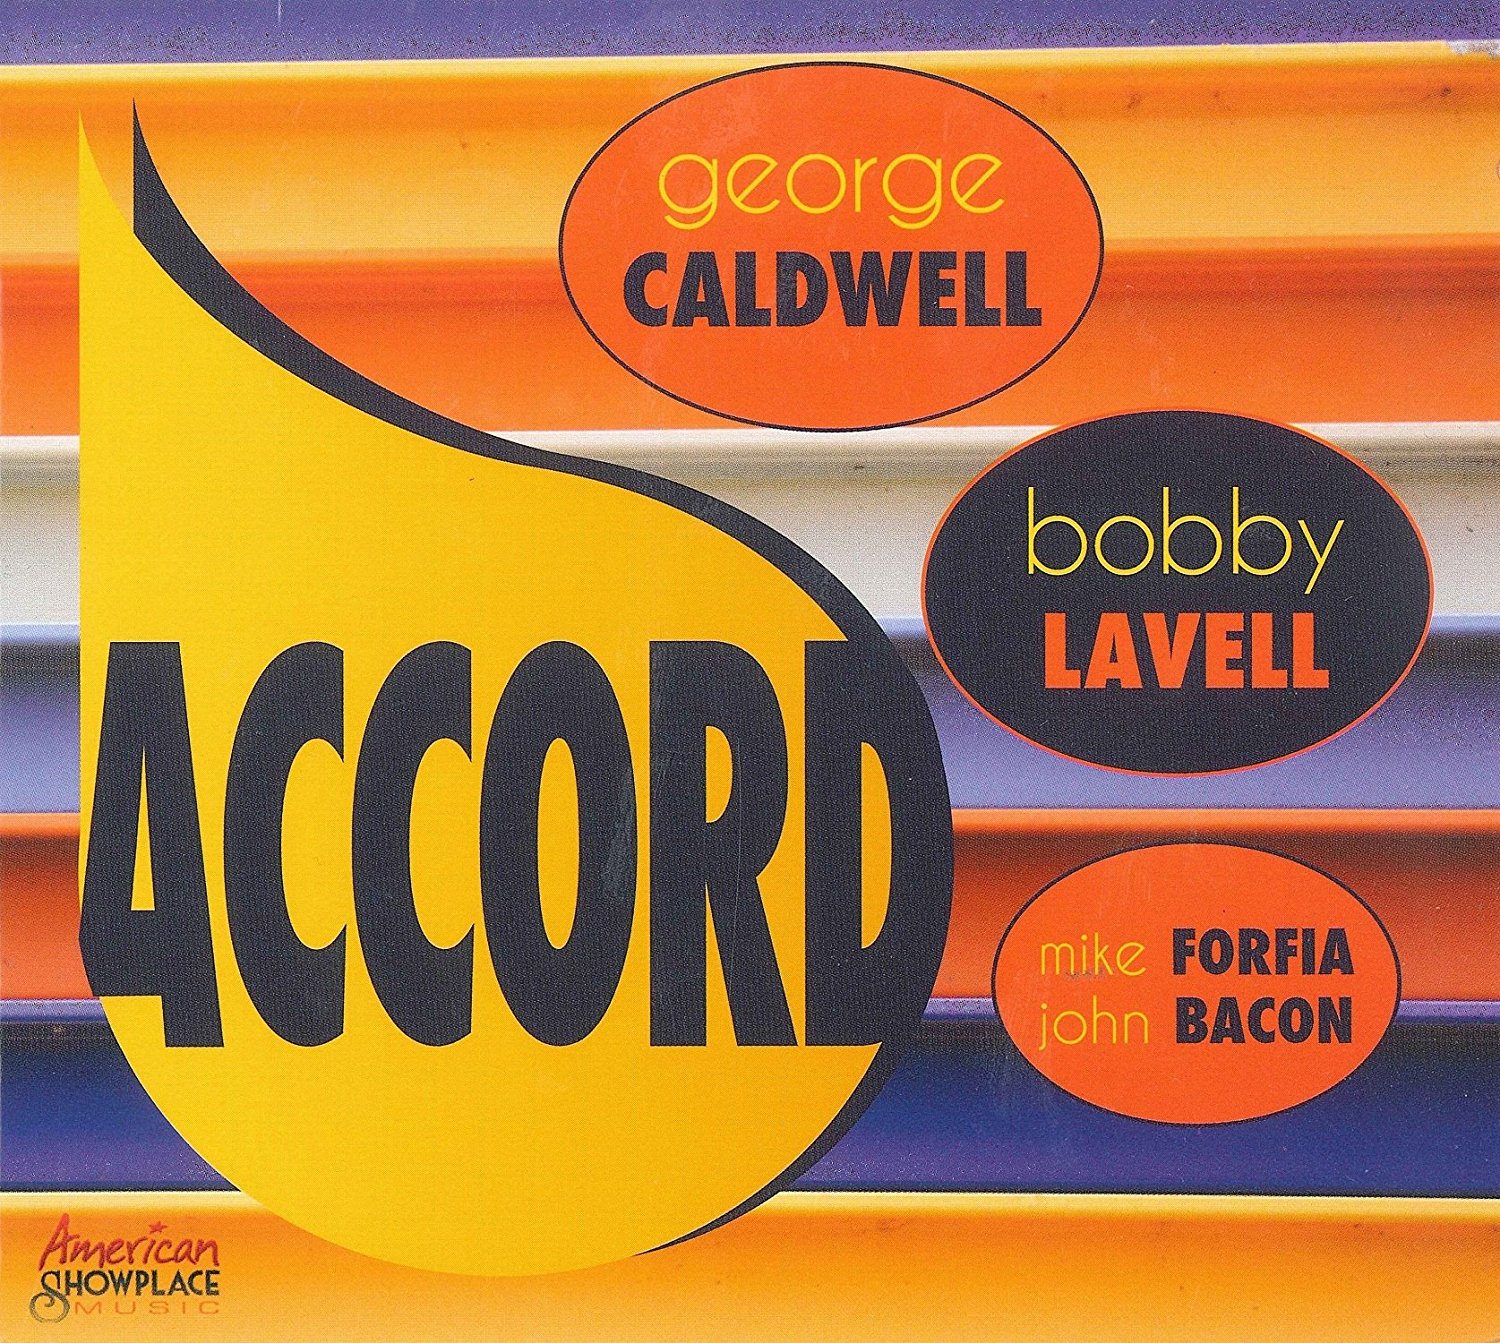 BOBBY CALDWELL - George Caldwell & Bobby Lavell : Accord cover 